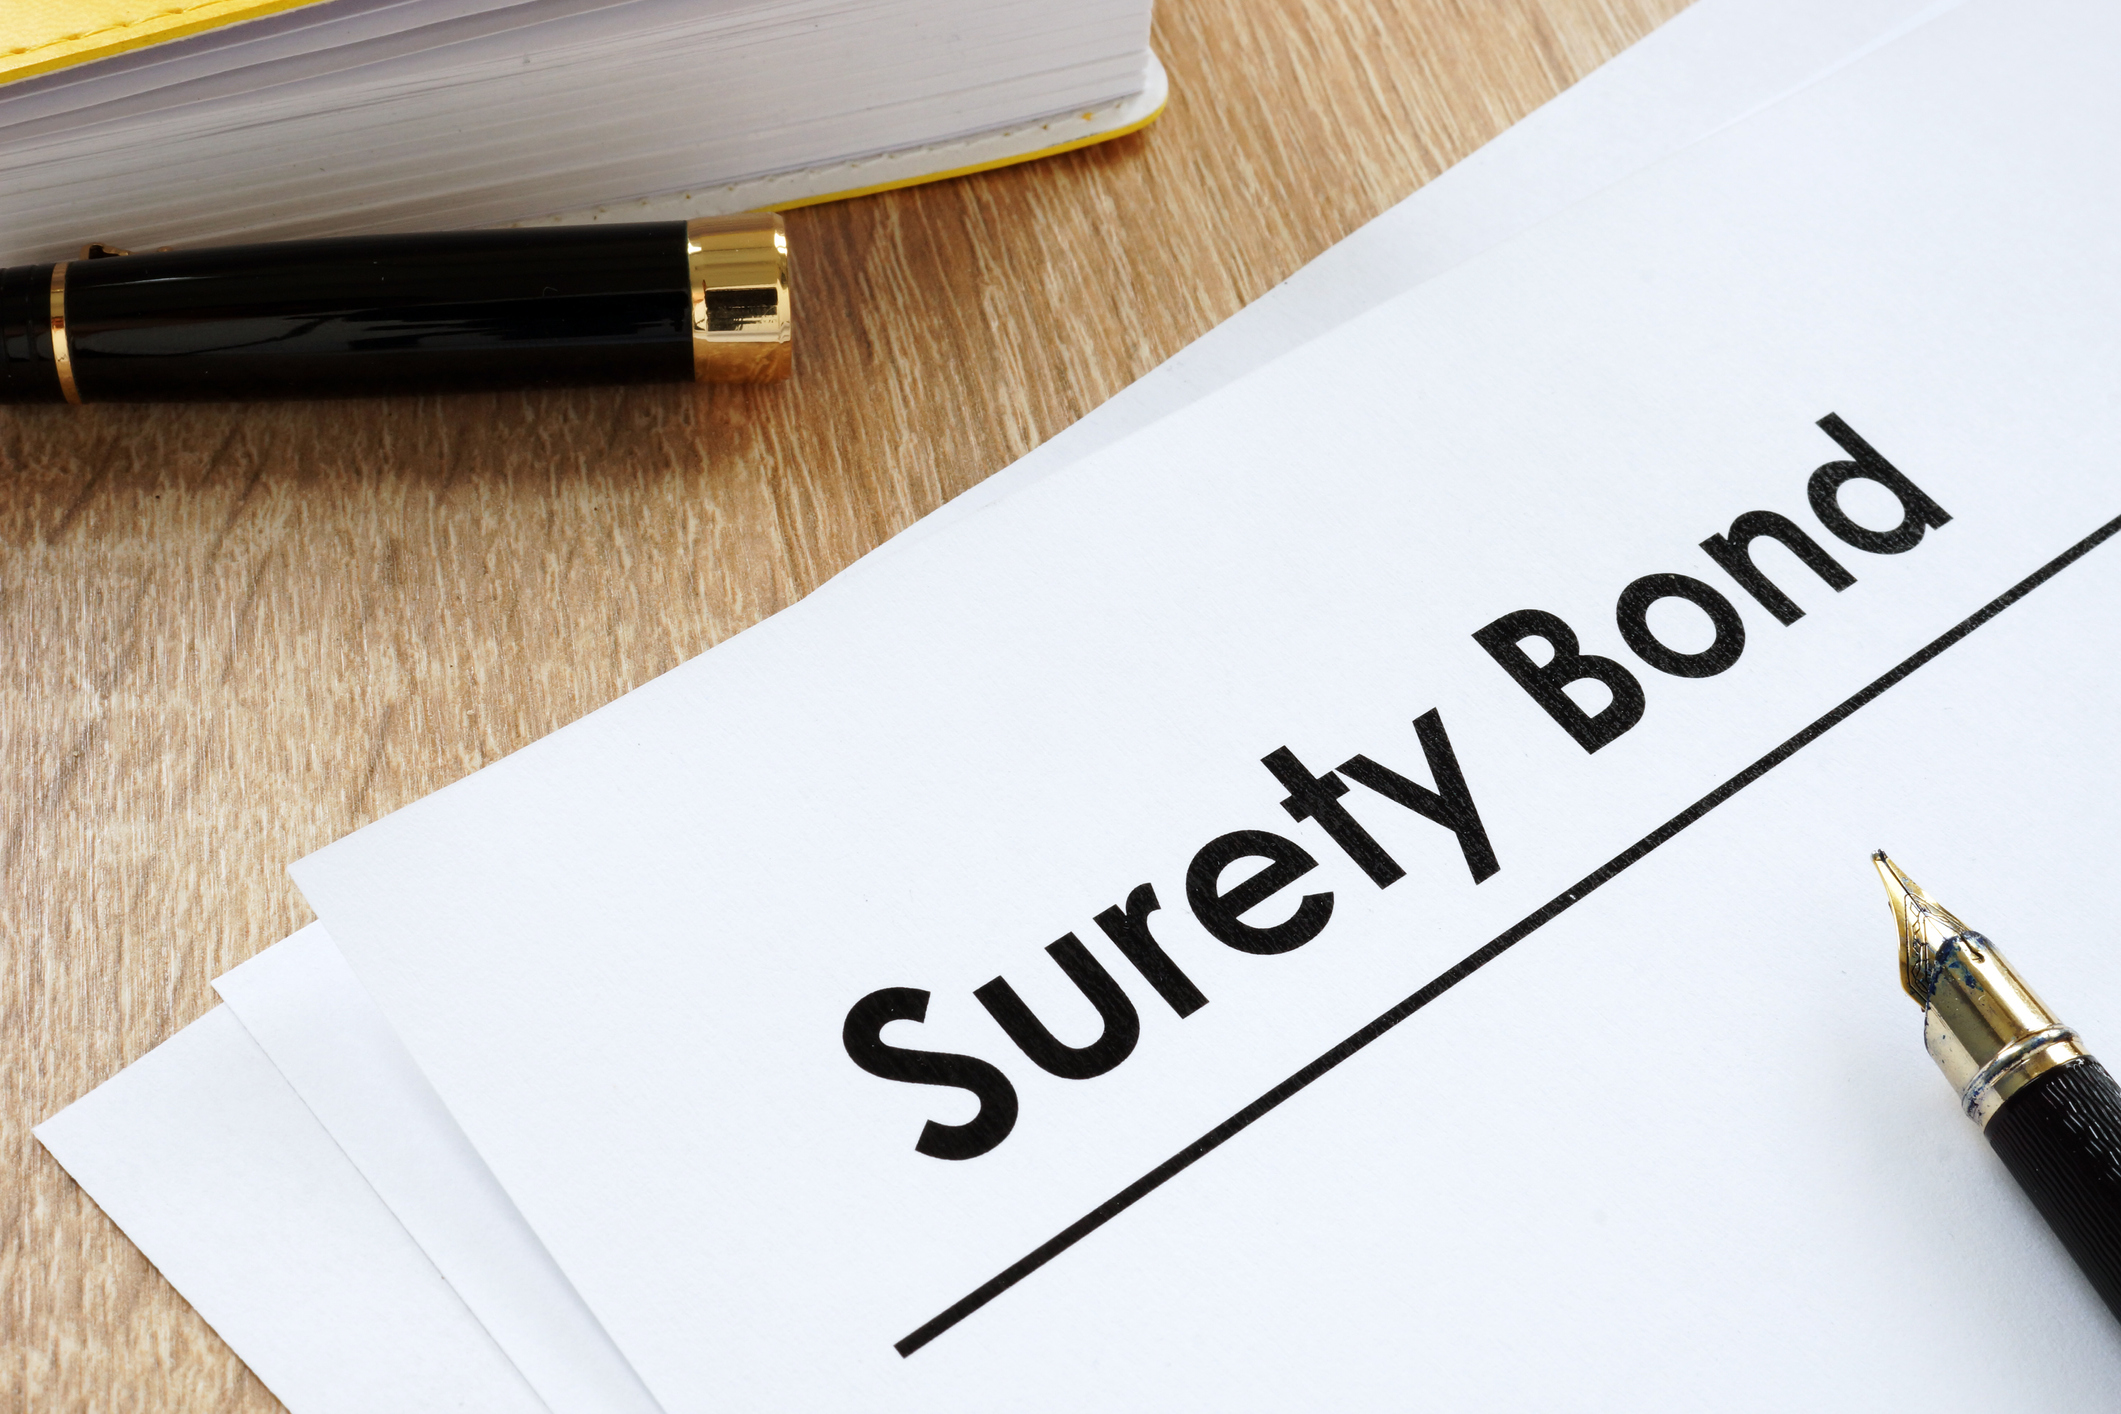 Beware of the Possible Expense of a Surety Bond in Estate Planning